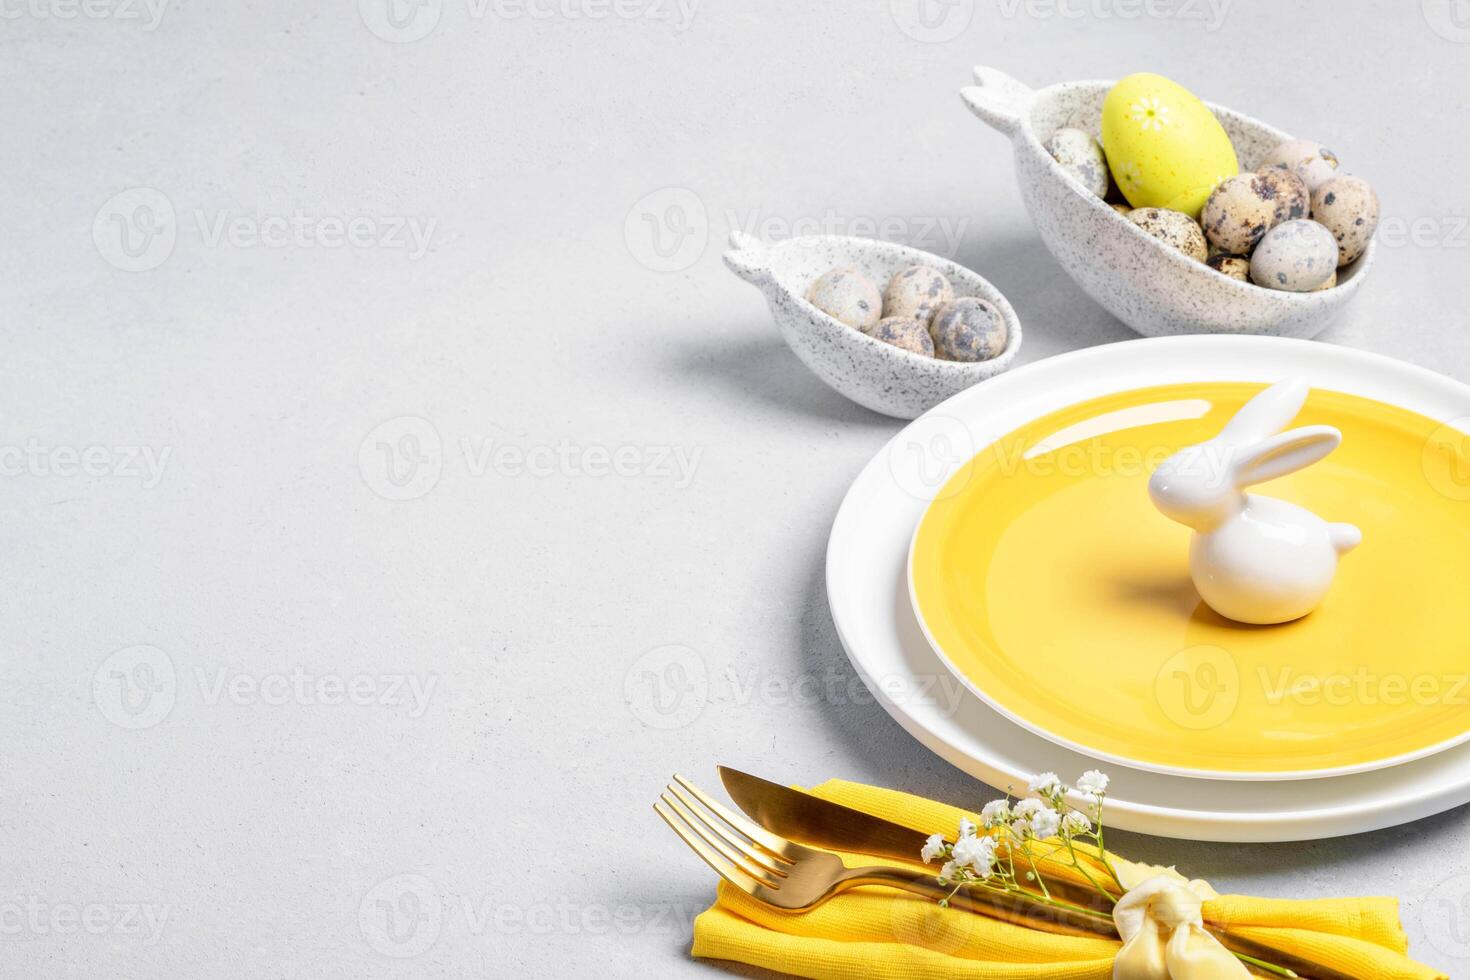 Easter table serving. White yellow dishware, quail eggs, golden cutlery, white ceramic bunny on gray photo